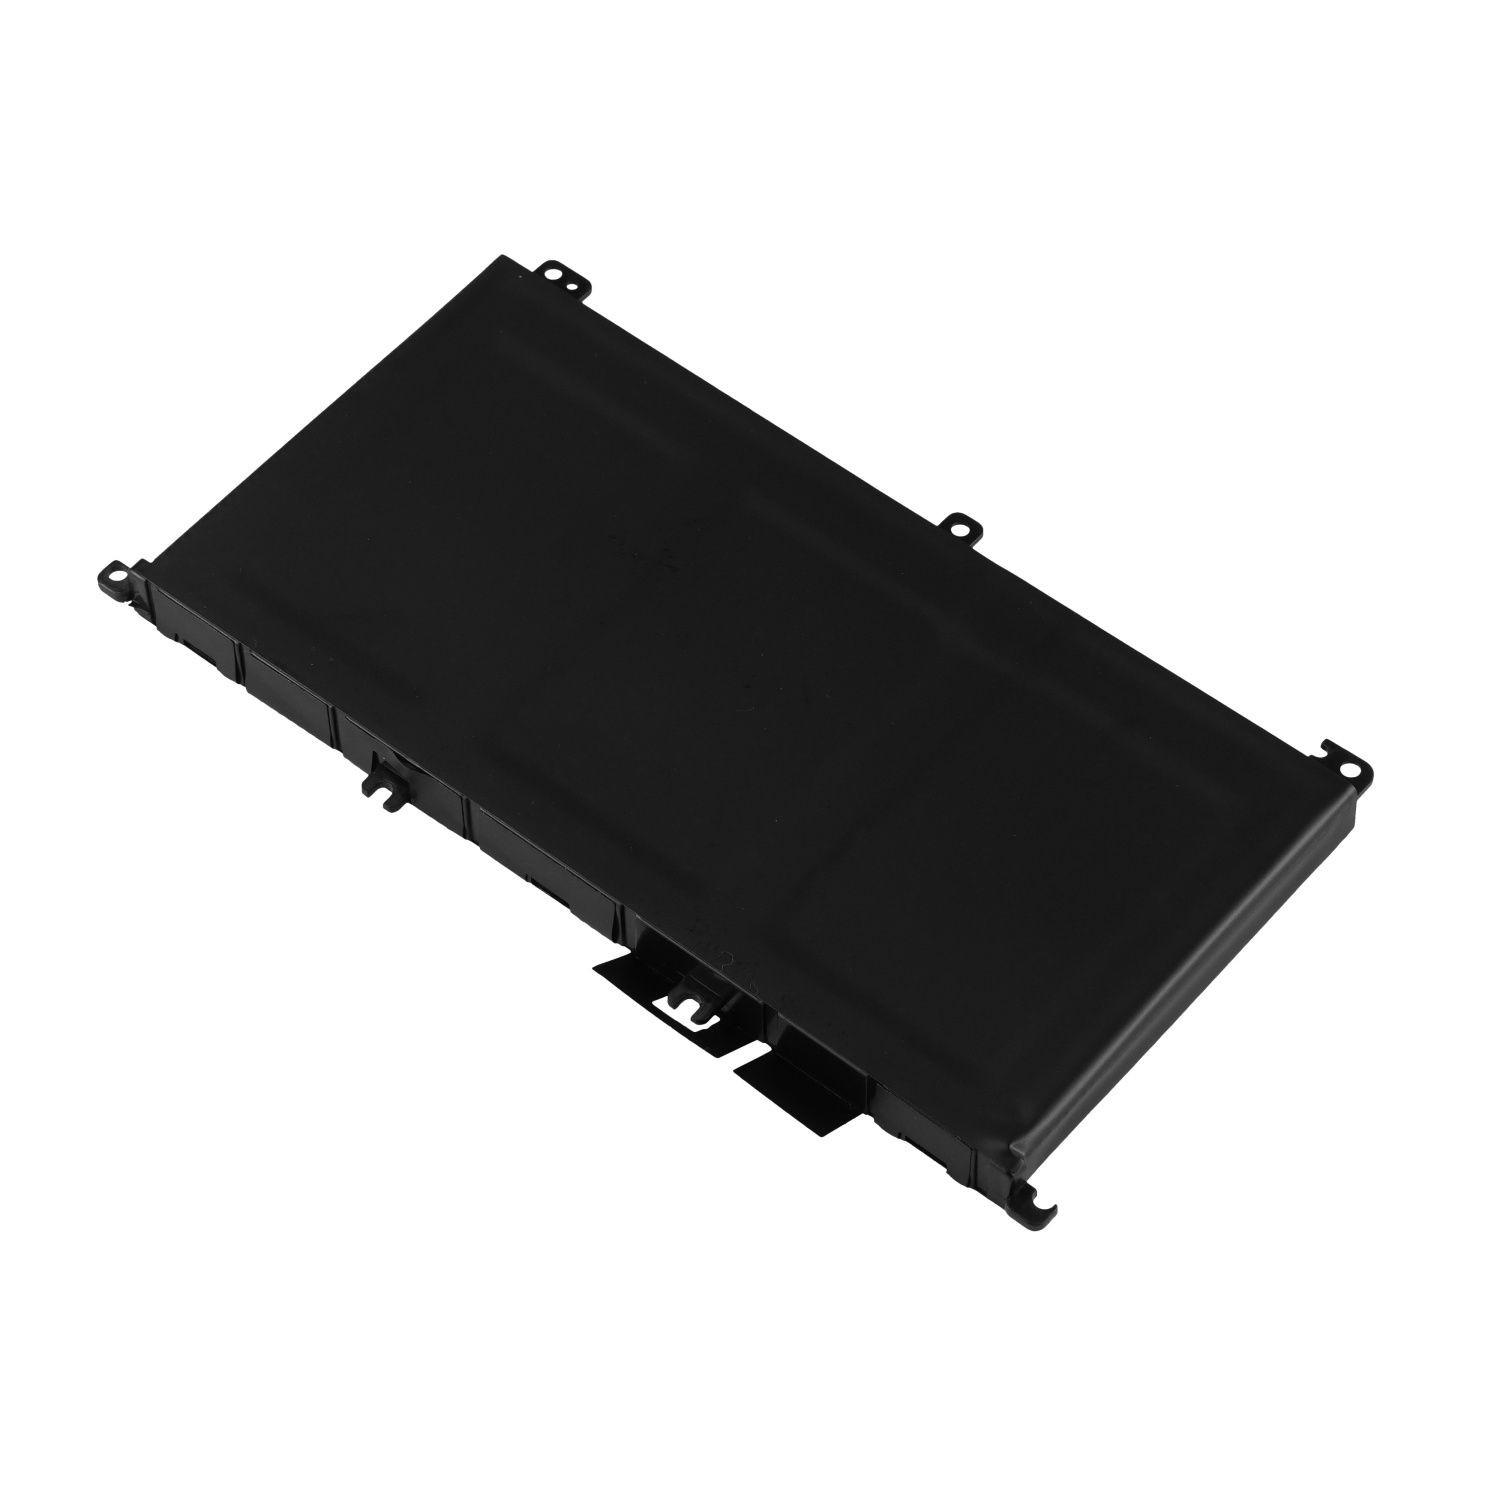 357F9 11.1V 74Wh Replacement Laptop Battery for Dell Laptop Inspiron 15 7000 7557 7559 7566 7567 5576 5577 INS15PD Series Notebook